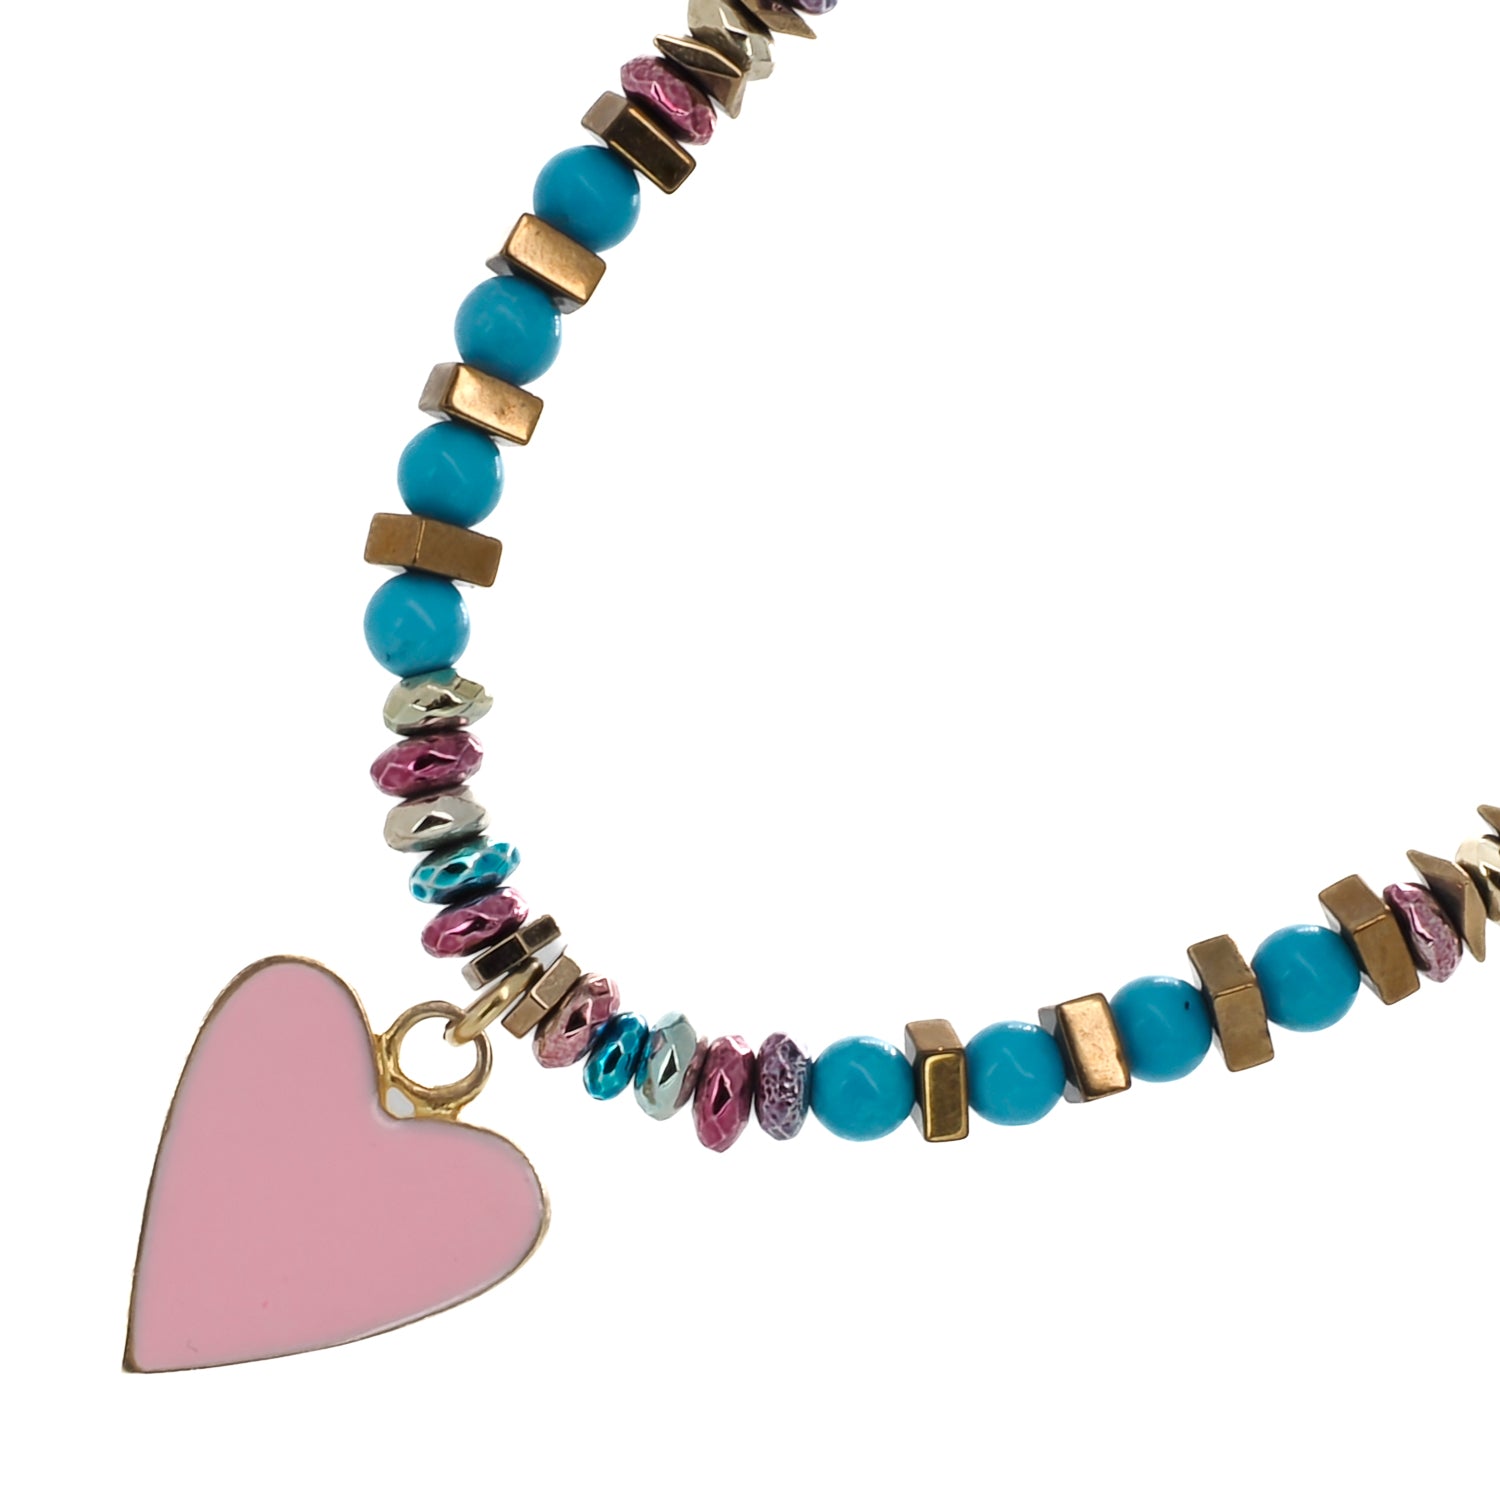 Symbol of Friendship and Love - This necklace radiates positive energy and meaningful connections.